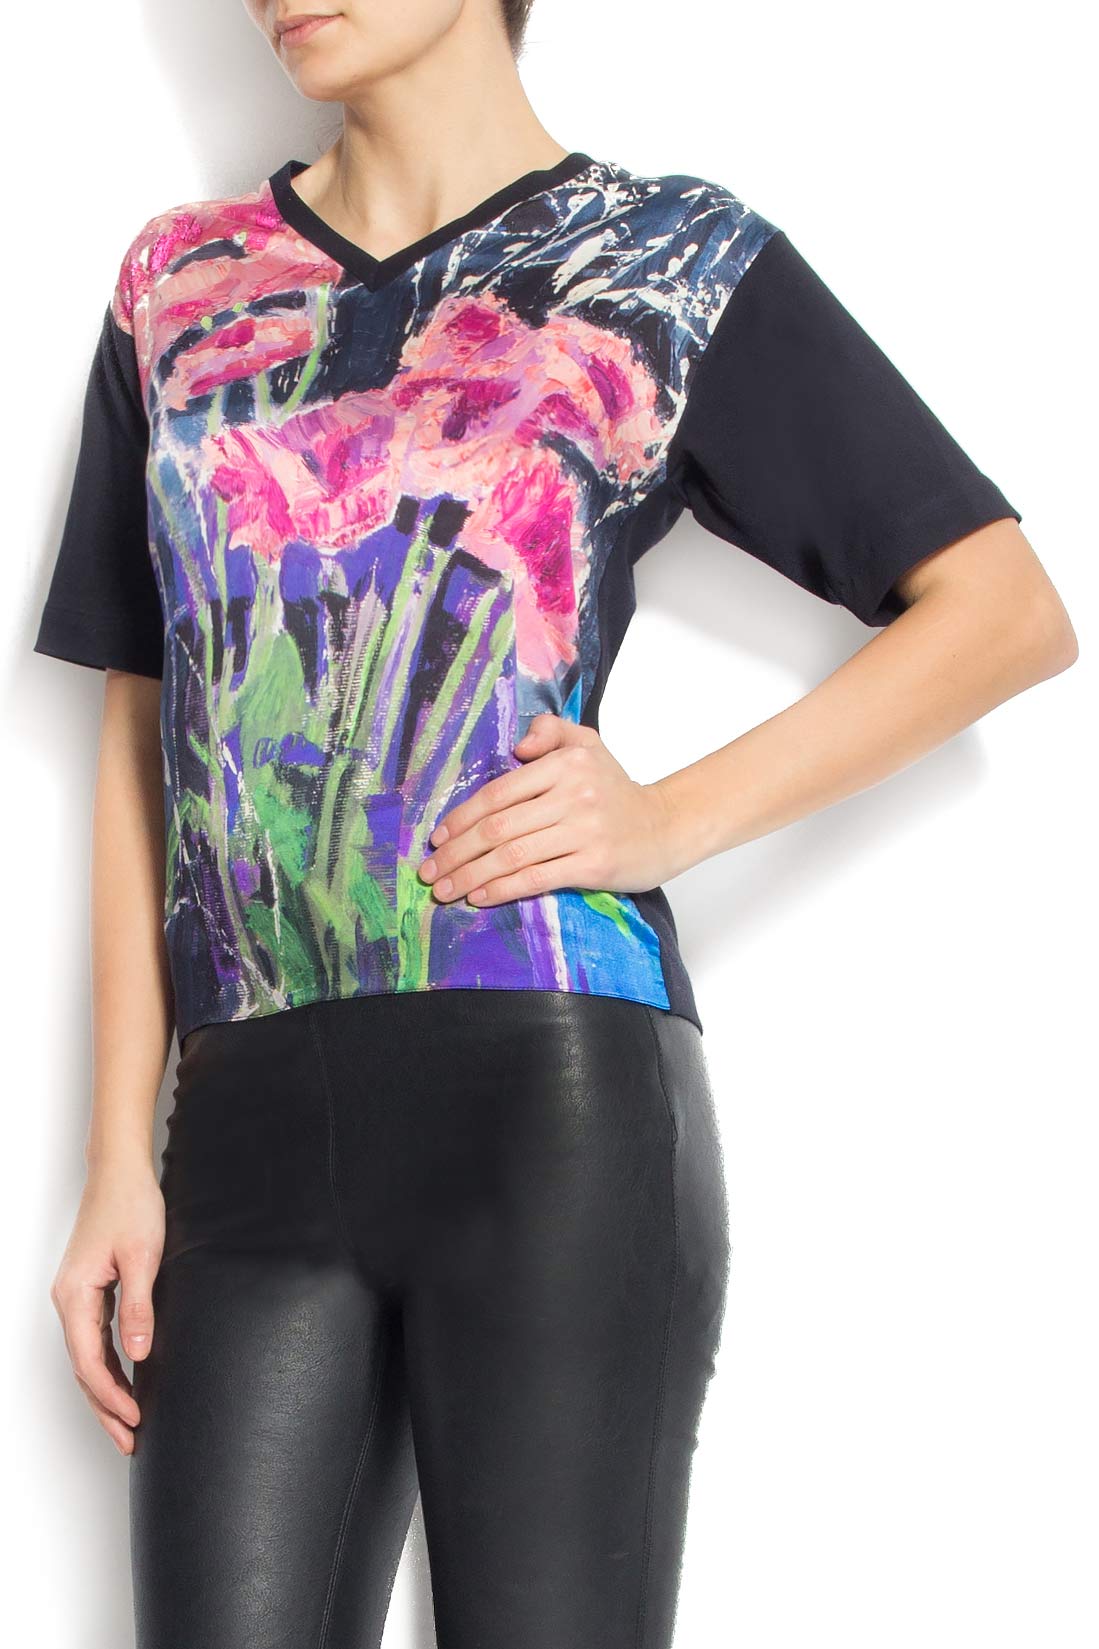 Printed silk top Argo by Andreea Buga image 2